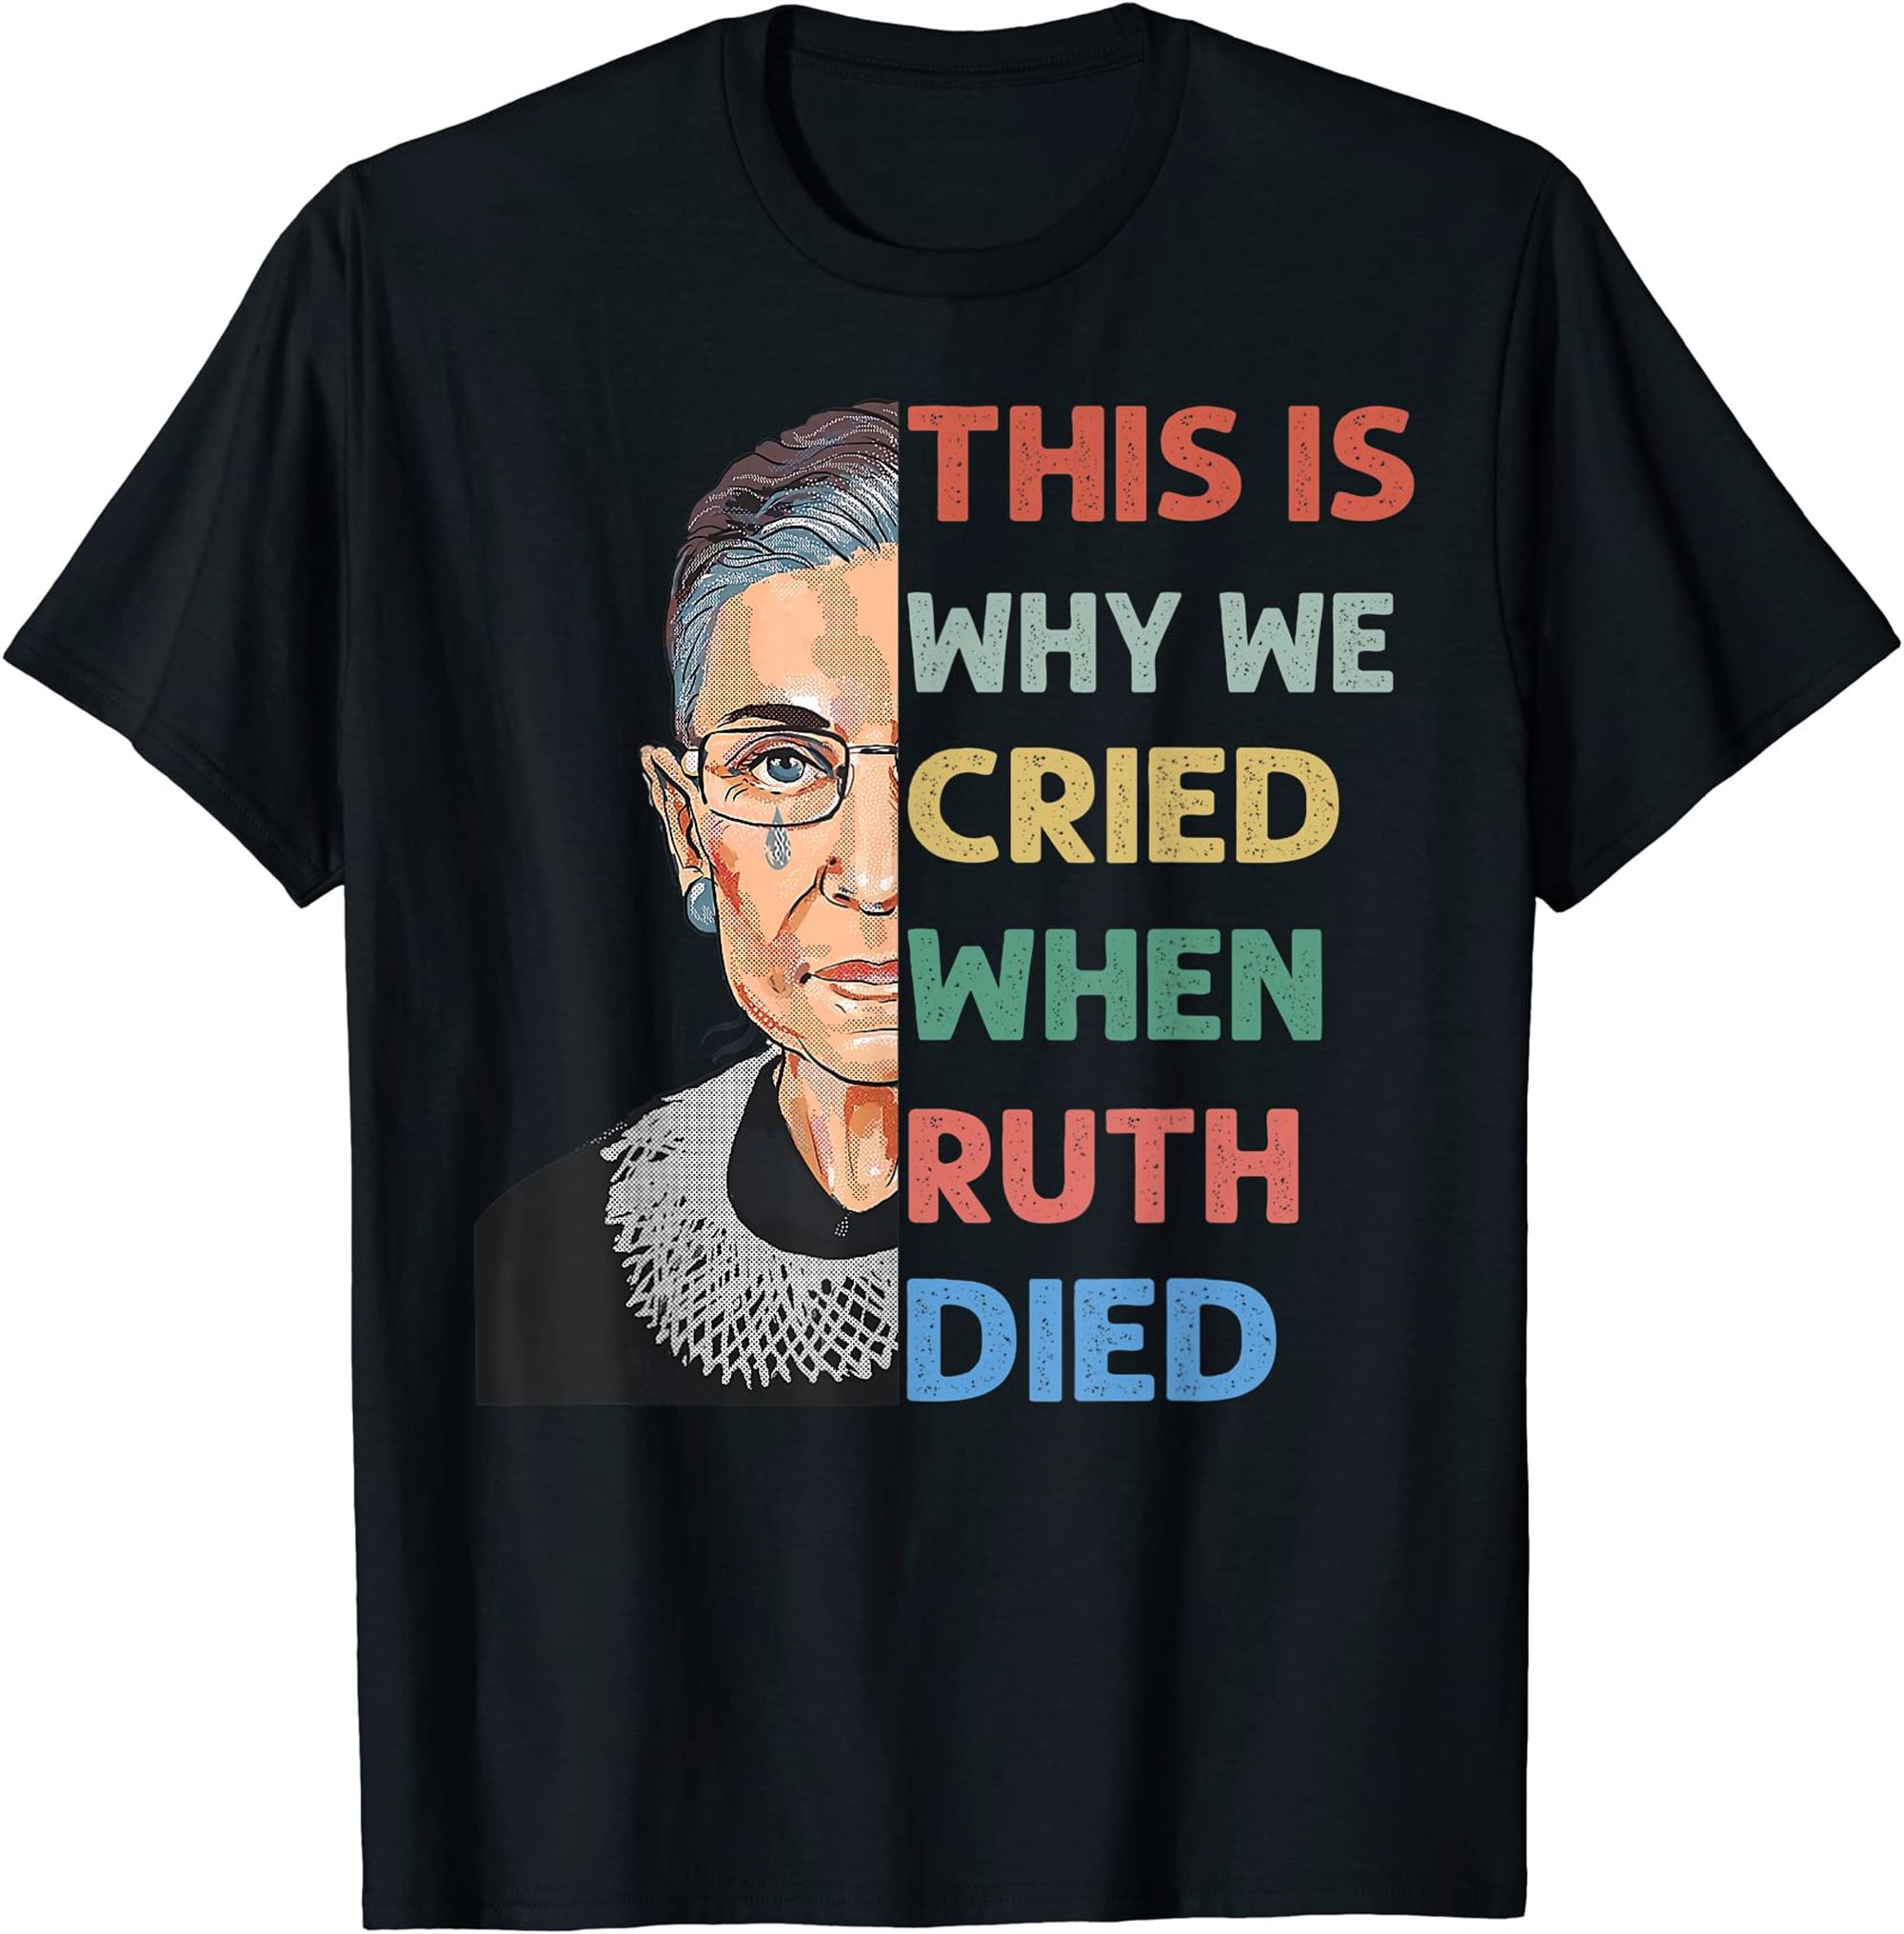 Rbg This Is Why We Cried Pro Choice Shirt Feminist Prochoice T Shirt Plus Size Up To 5xl